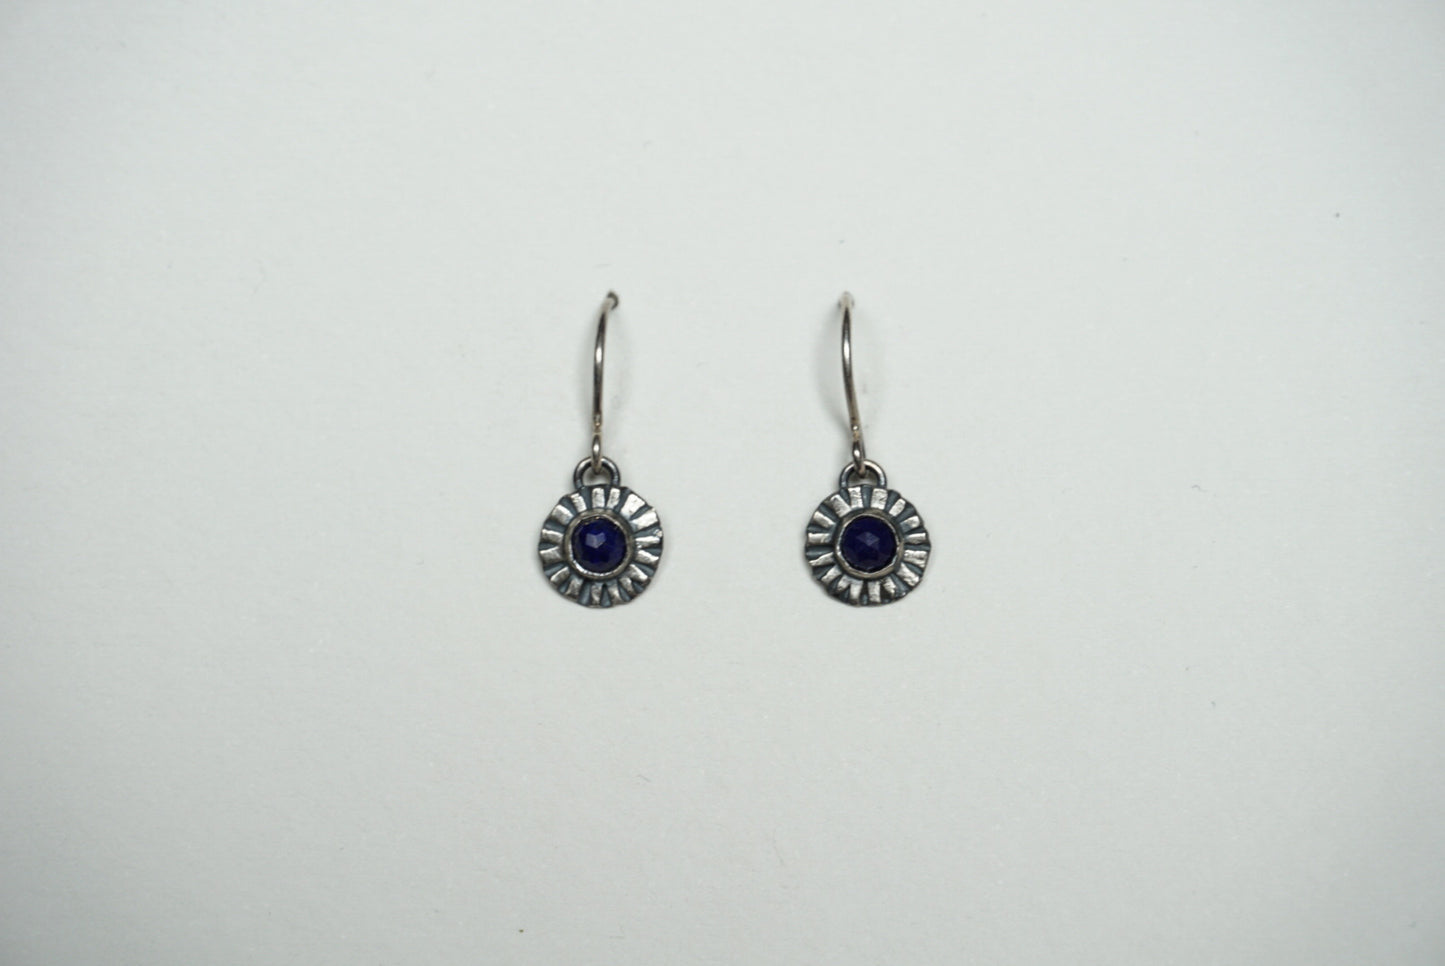 Small silver ridged circle drop earring with lapis